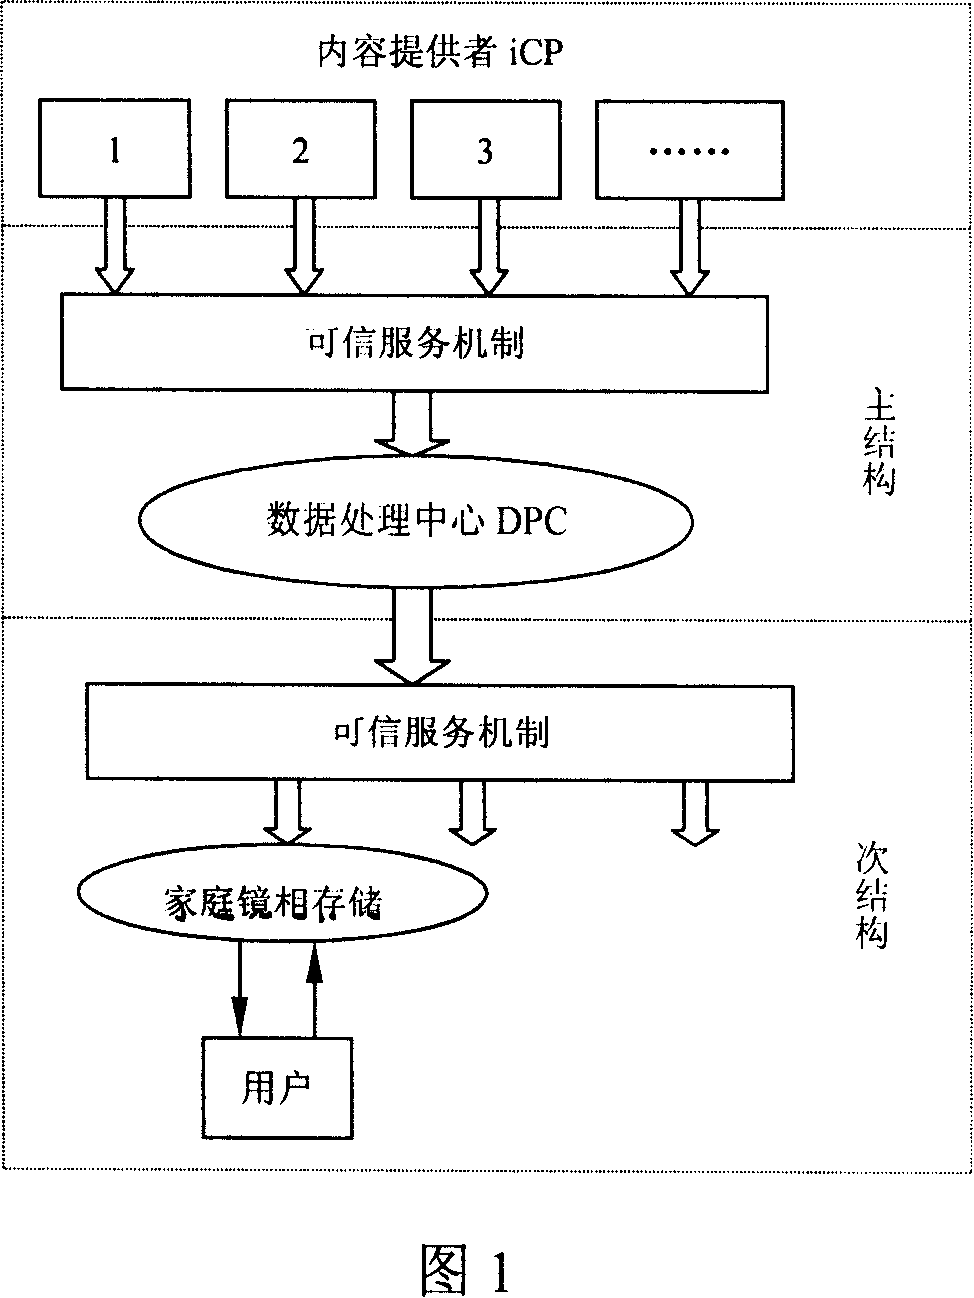 Method of implementing reliable service on complementary structure information network